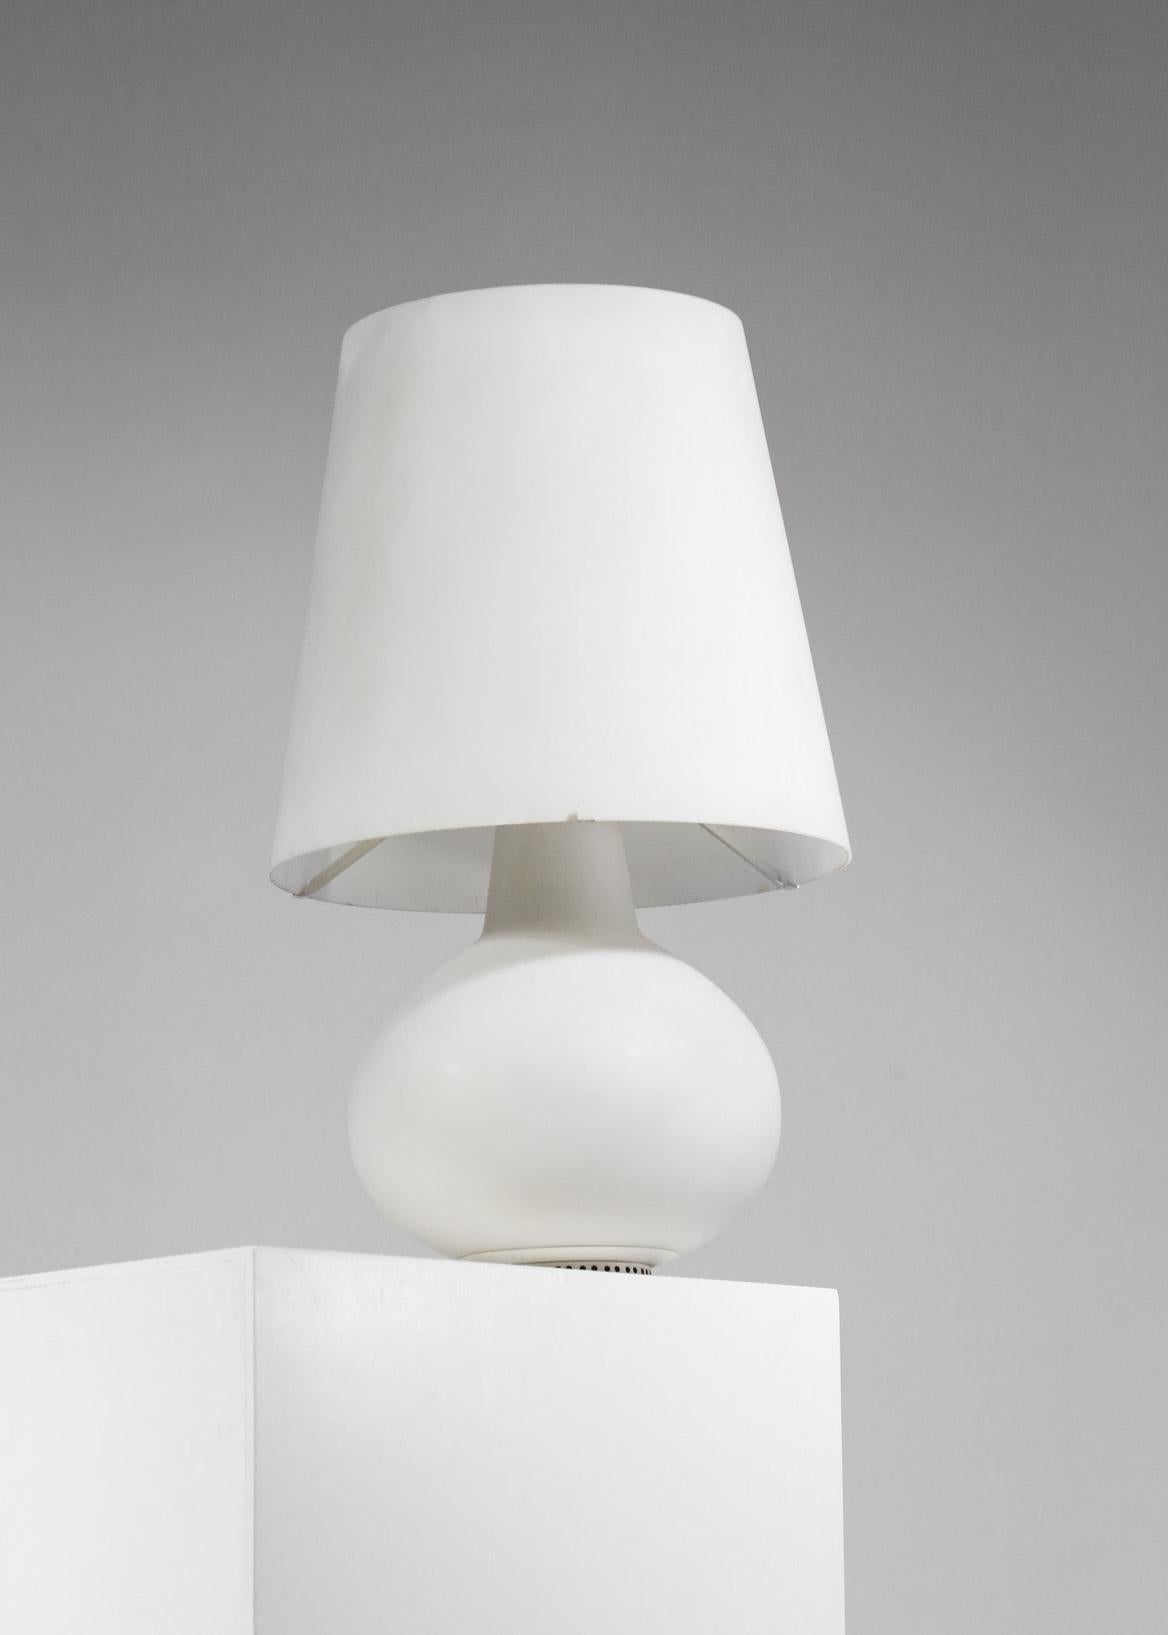 Mid-20th Century Original Large Fontana Arte Lamp by Max Ingrand circa 1960 Opaline Glass For Sale